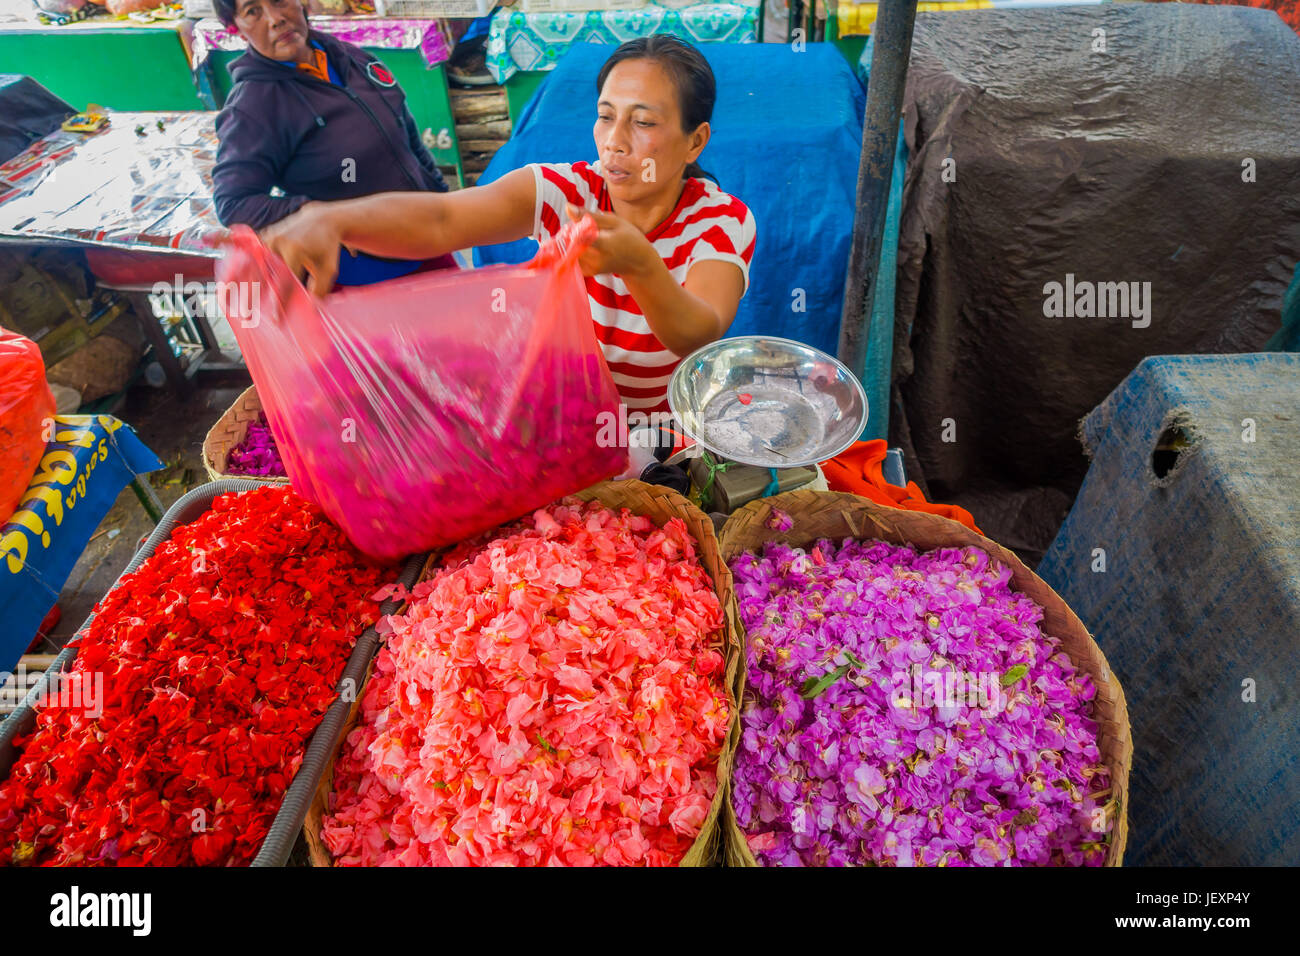 BALI, INDONESIA - MARCH 08, 2017: Unidentified people in outdoors Bali flower market. Flowers are used daily by Balinese Hindus as symbolic offerings  Stock Photo